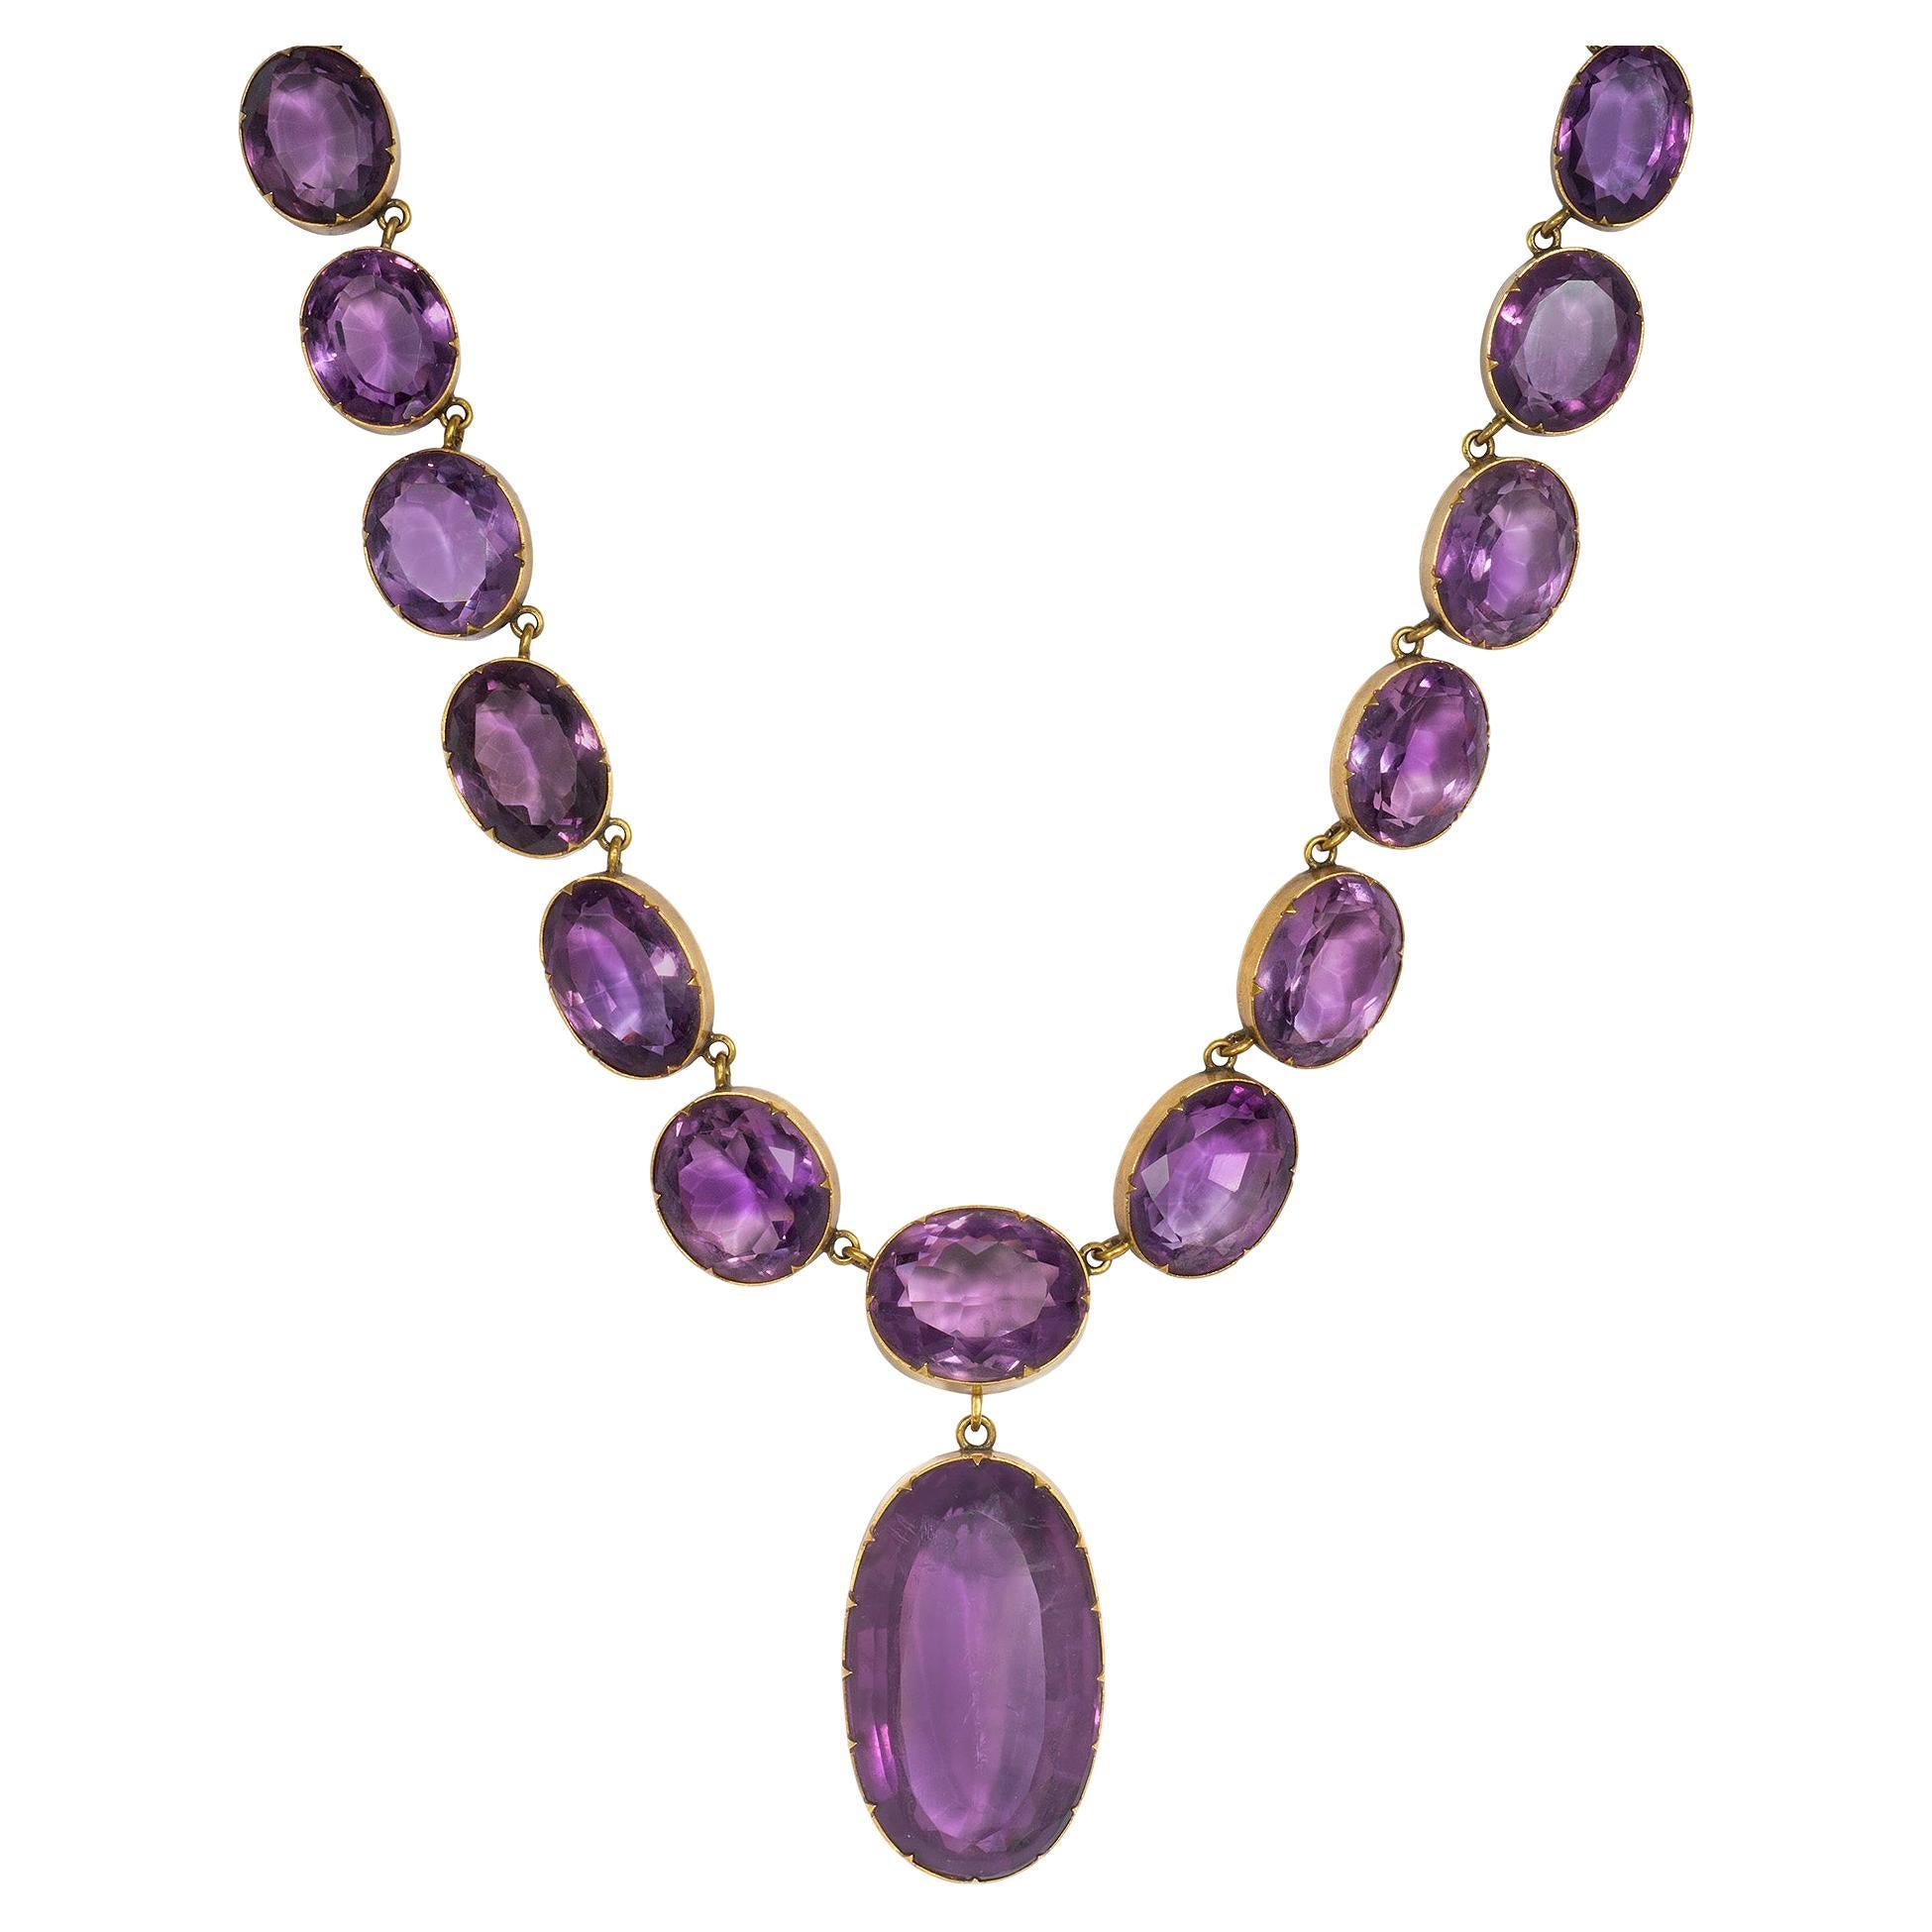 Antique Gold and Amethyst Rivière-Style Necklace with Detachable Pendant For Sale